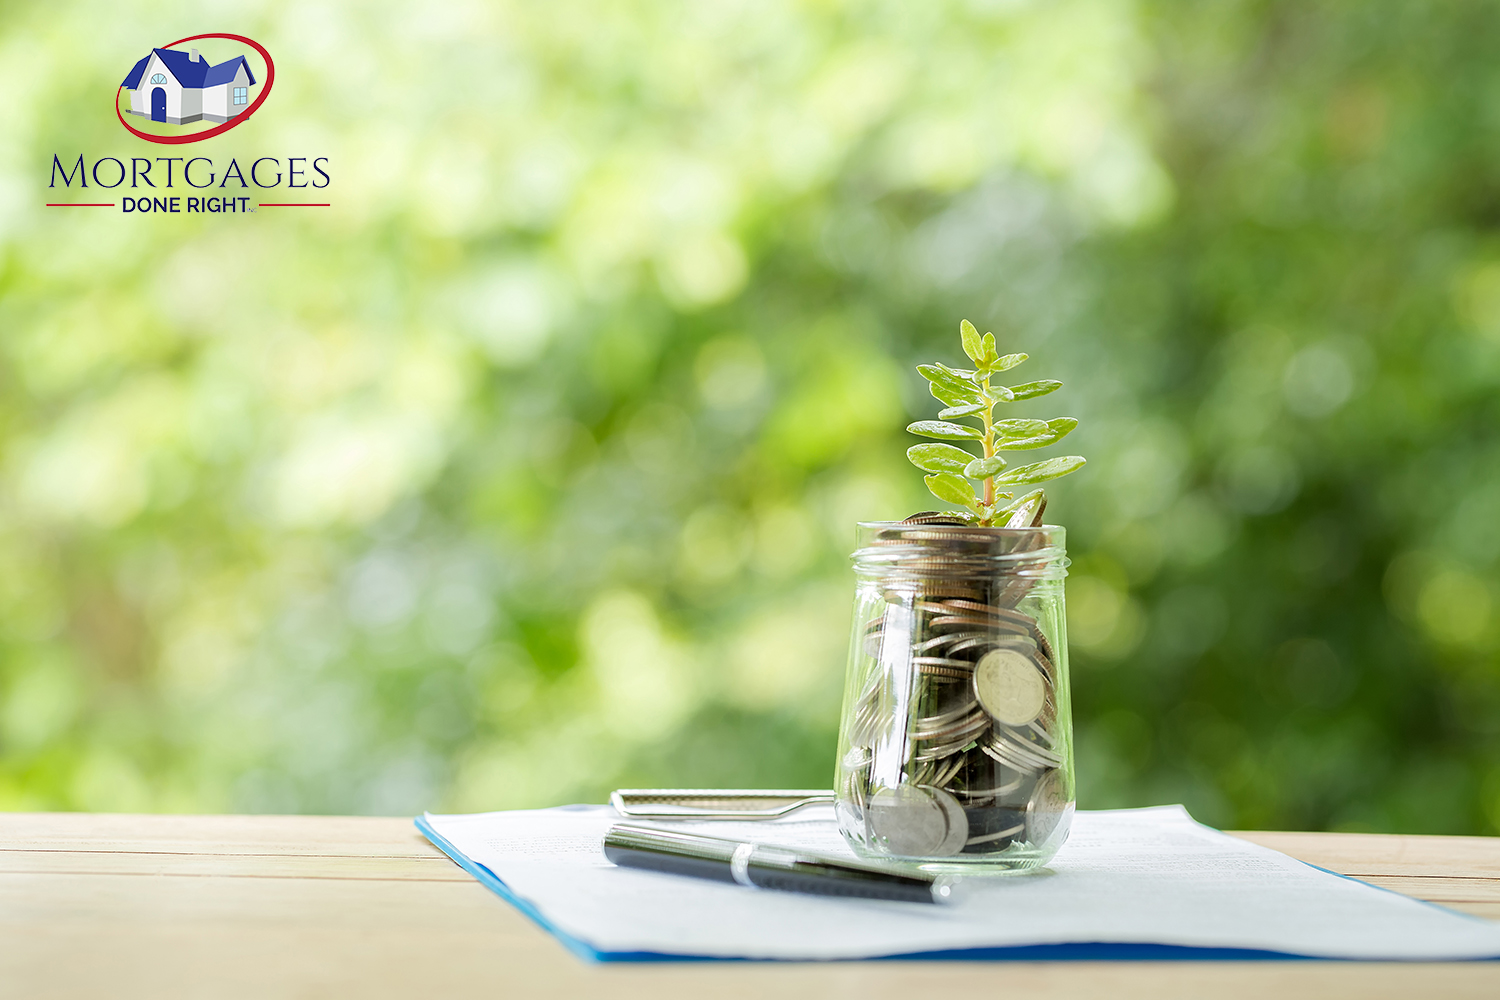 Plant growing from coins in the glass jar on blurred green natural background. copy space for business and financial growth concept.